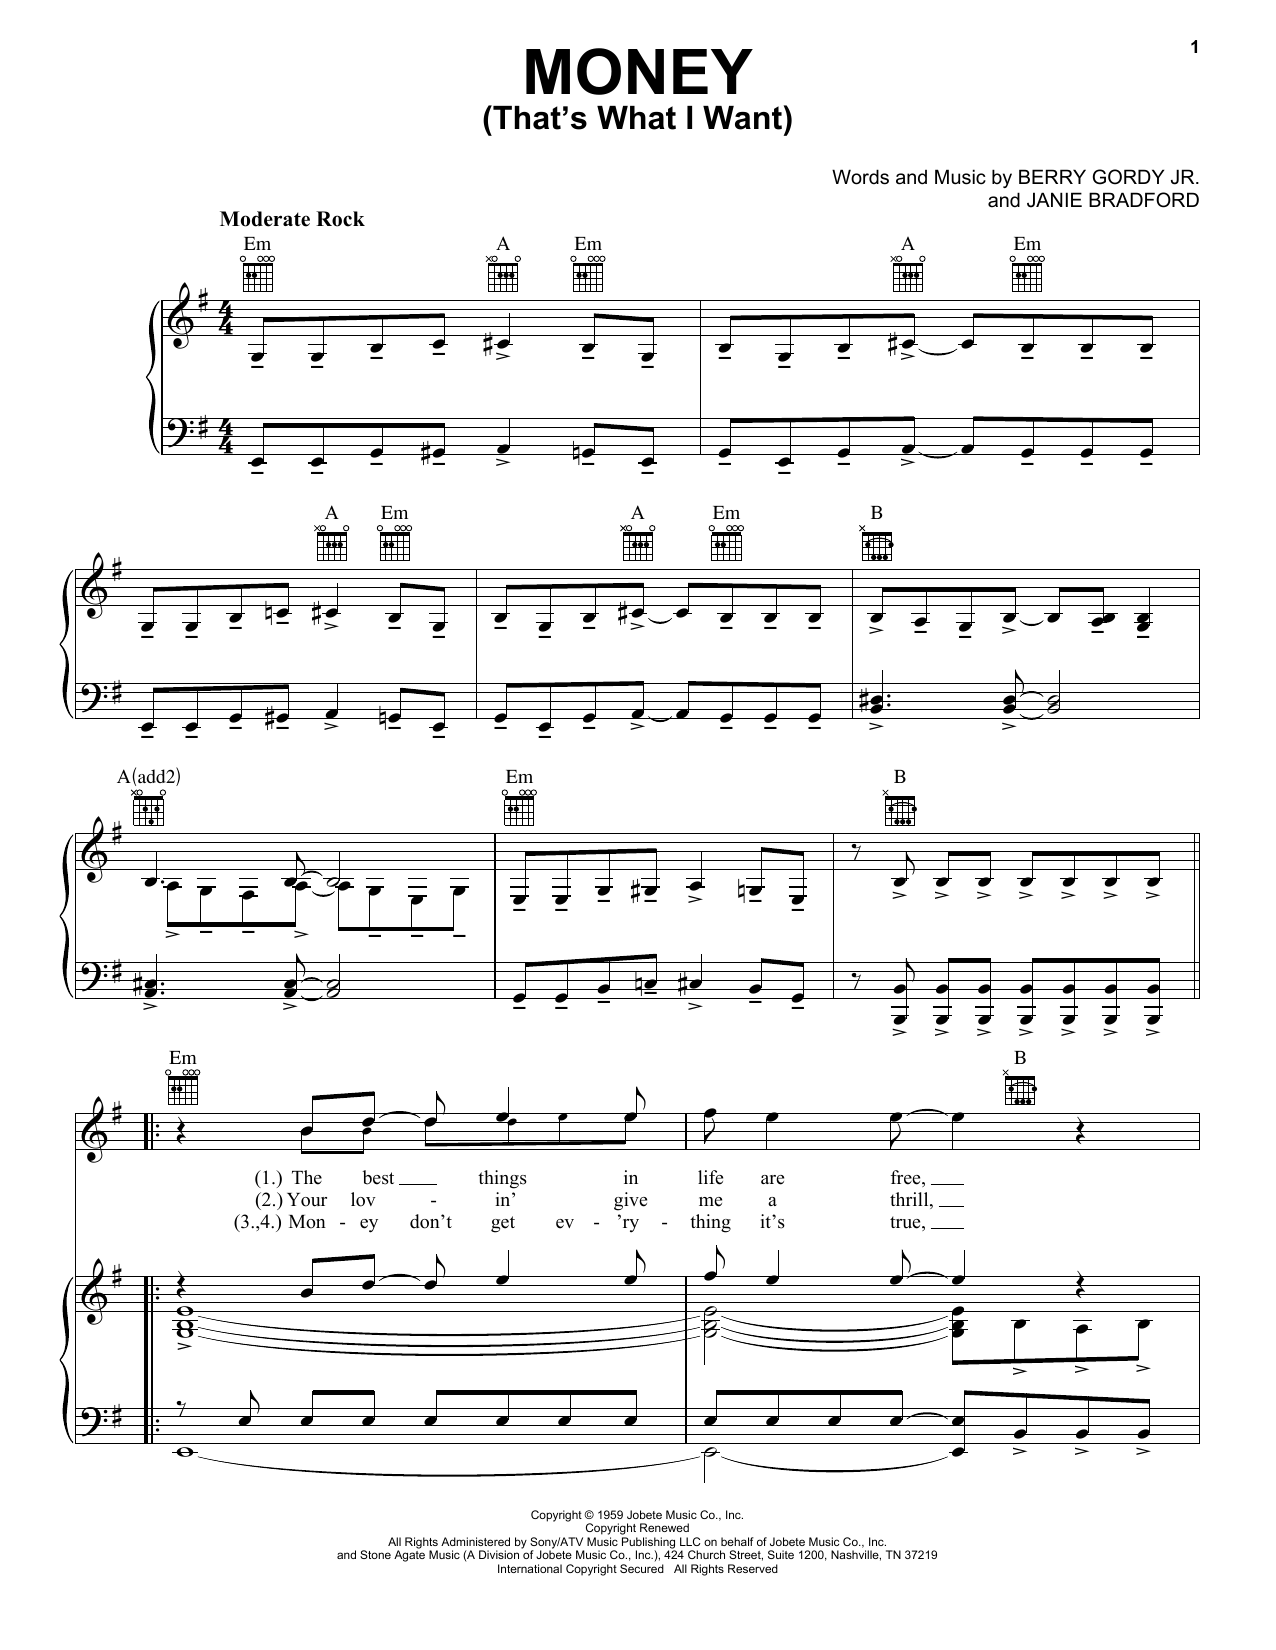 Download The Beatles Money (That's What I Want) Sheet Music